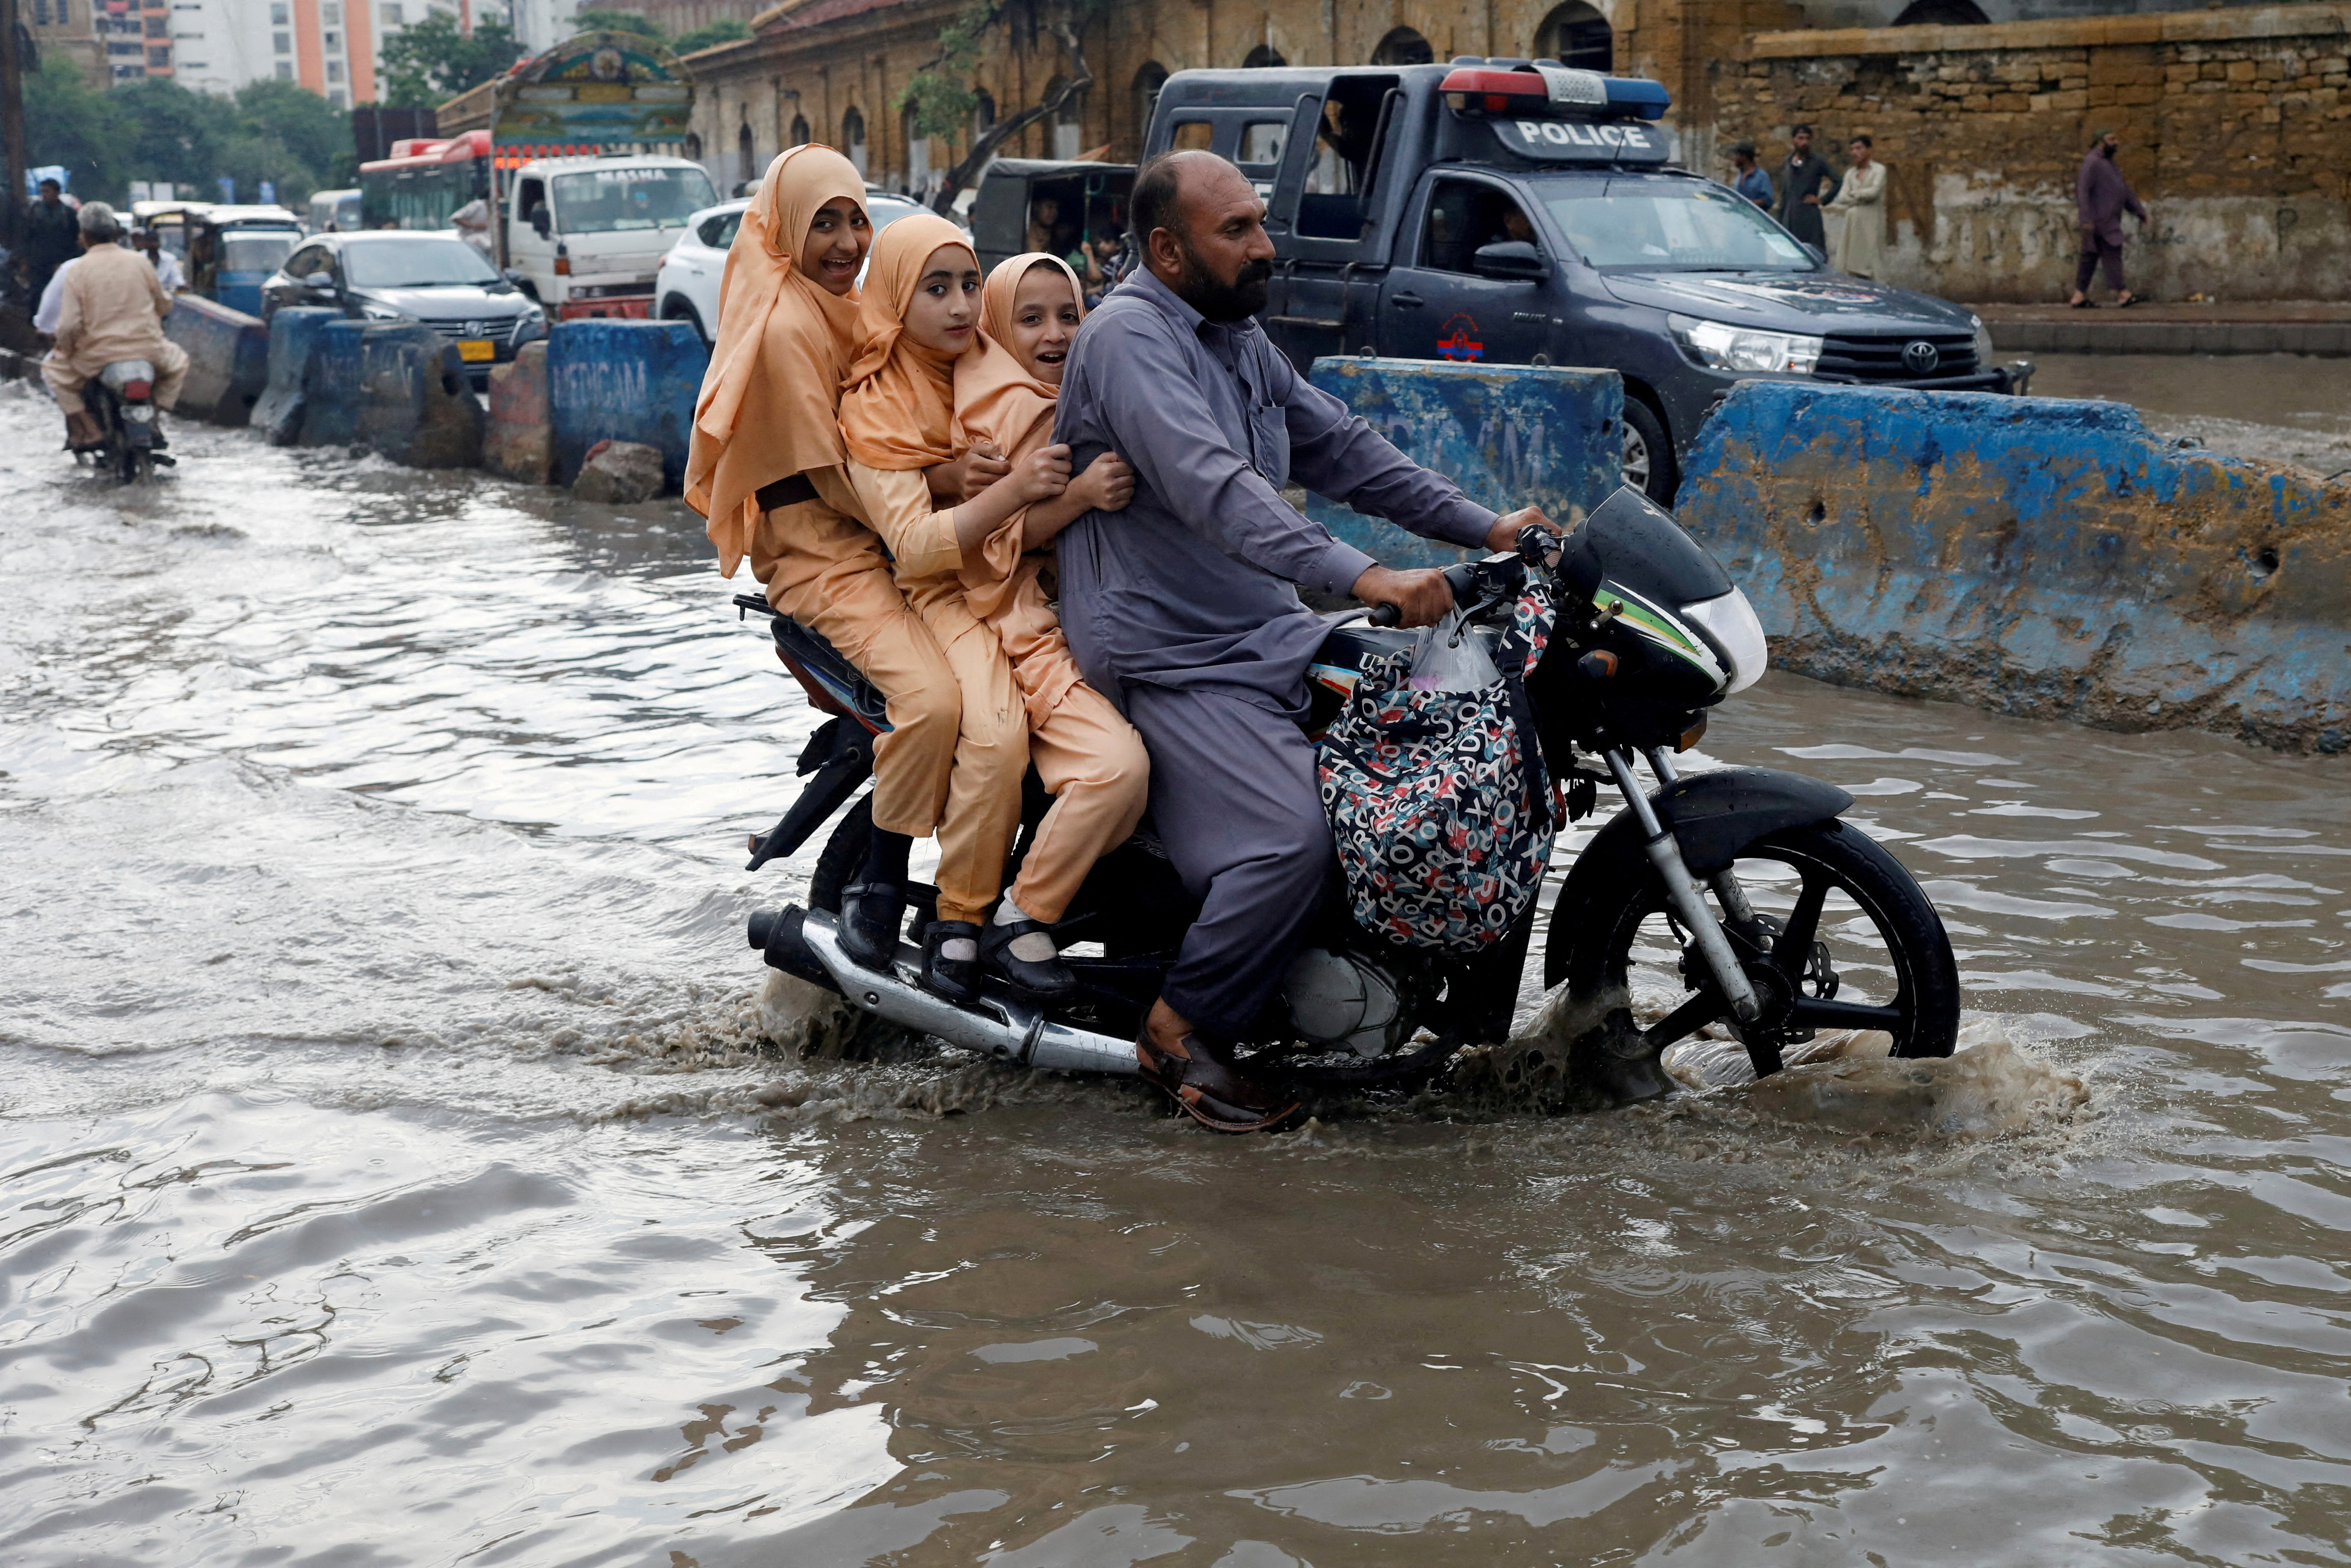 Man and students ride on a motorcycle on a flooded road, following rains during the monsoon season in Karachi